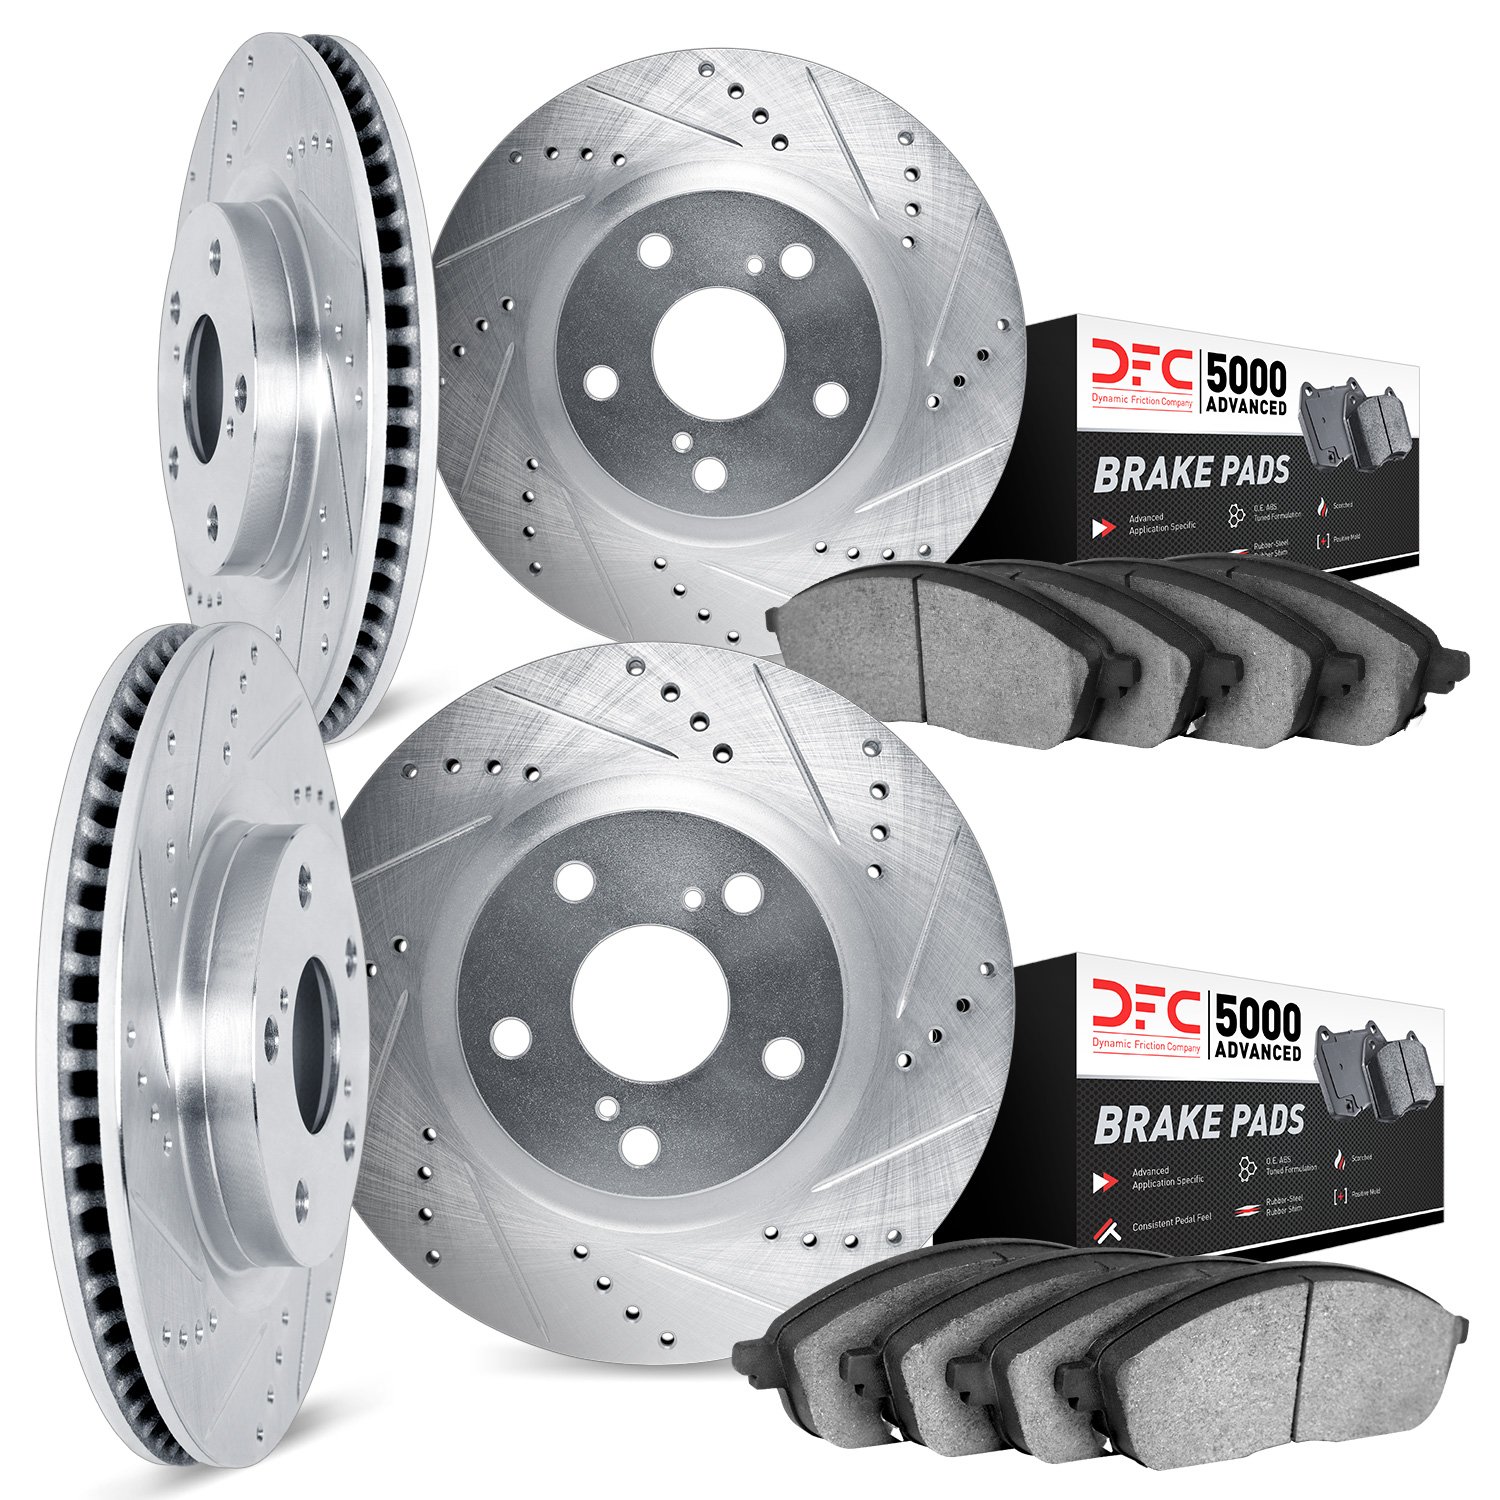 7504-74081 Drilled/Slotted Brake Rotors w/5000 Advanced Brake Pads Kit [Silver], 2006-2010 Audi/Volkswagen, Position: Front and